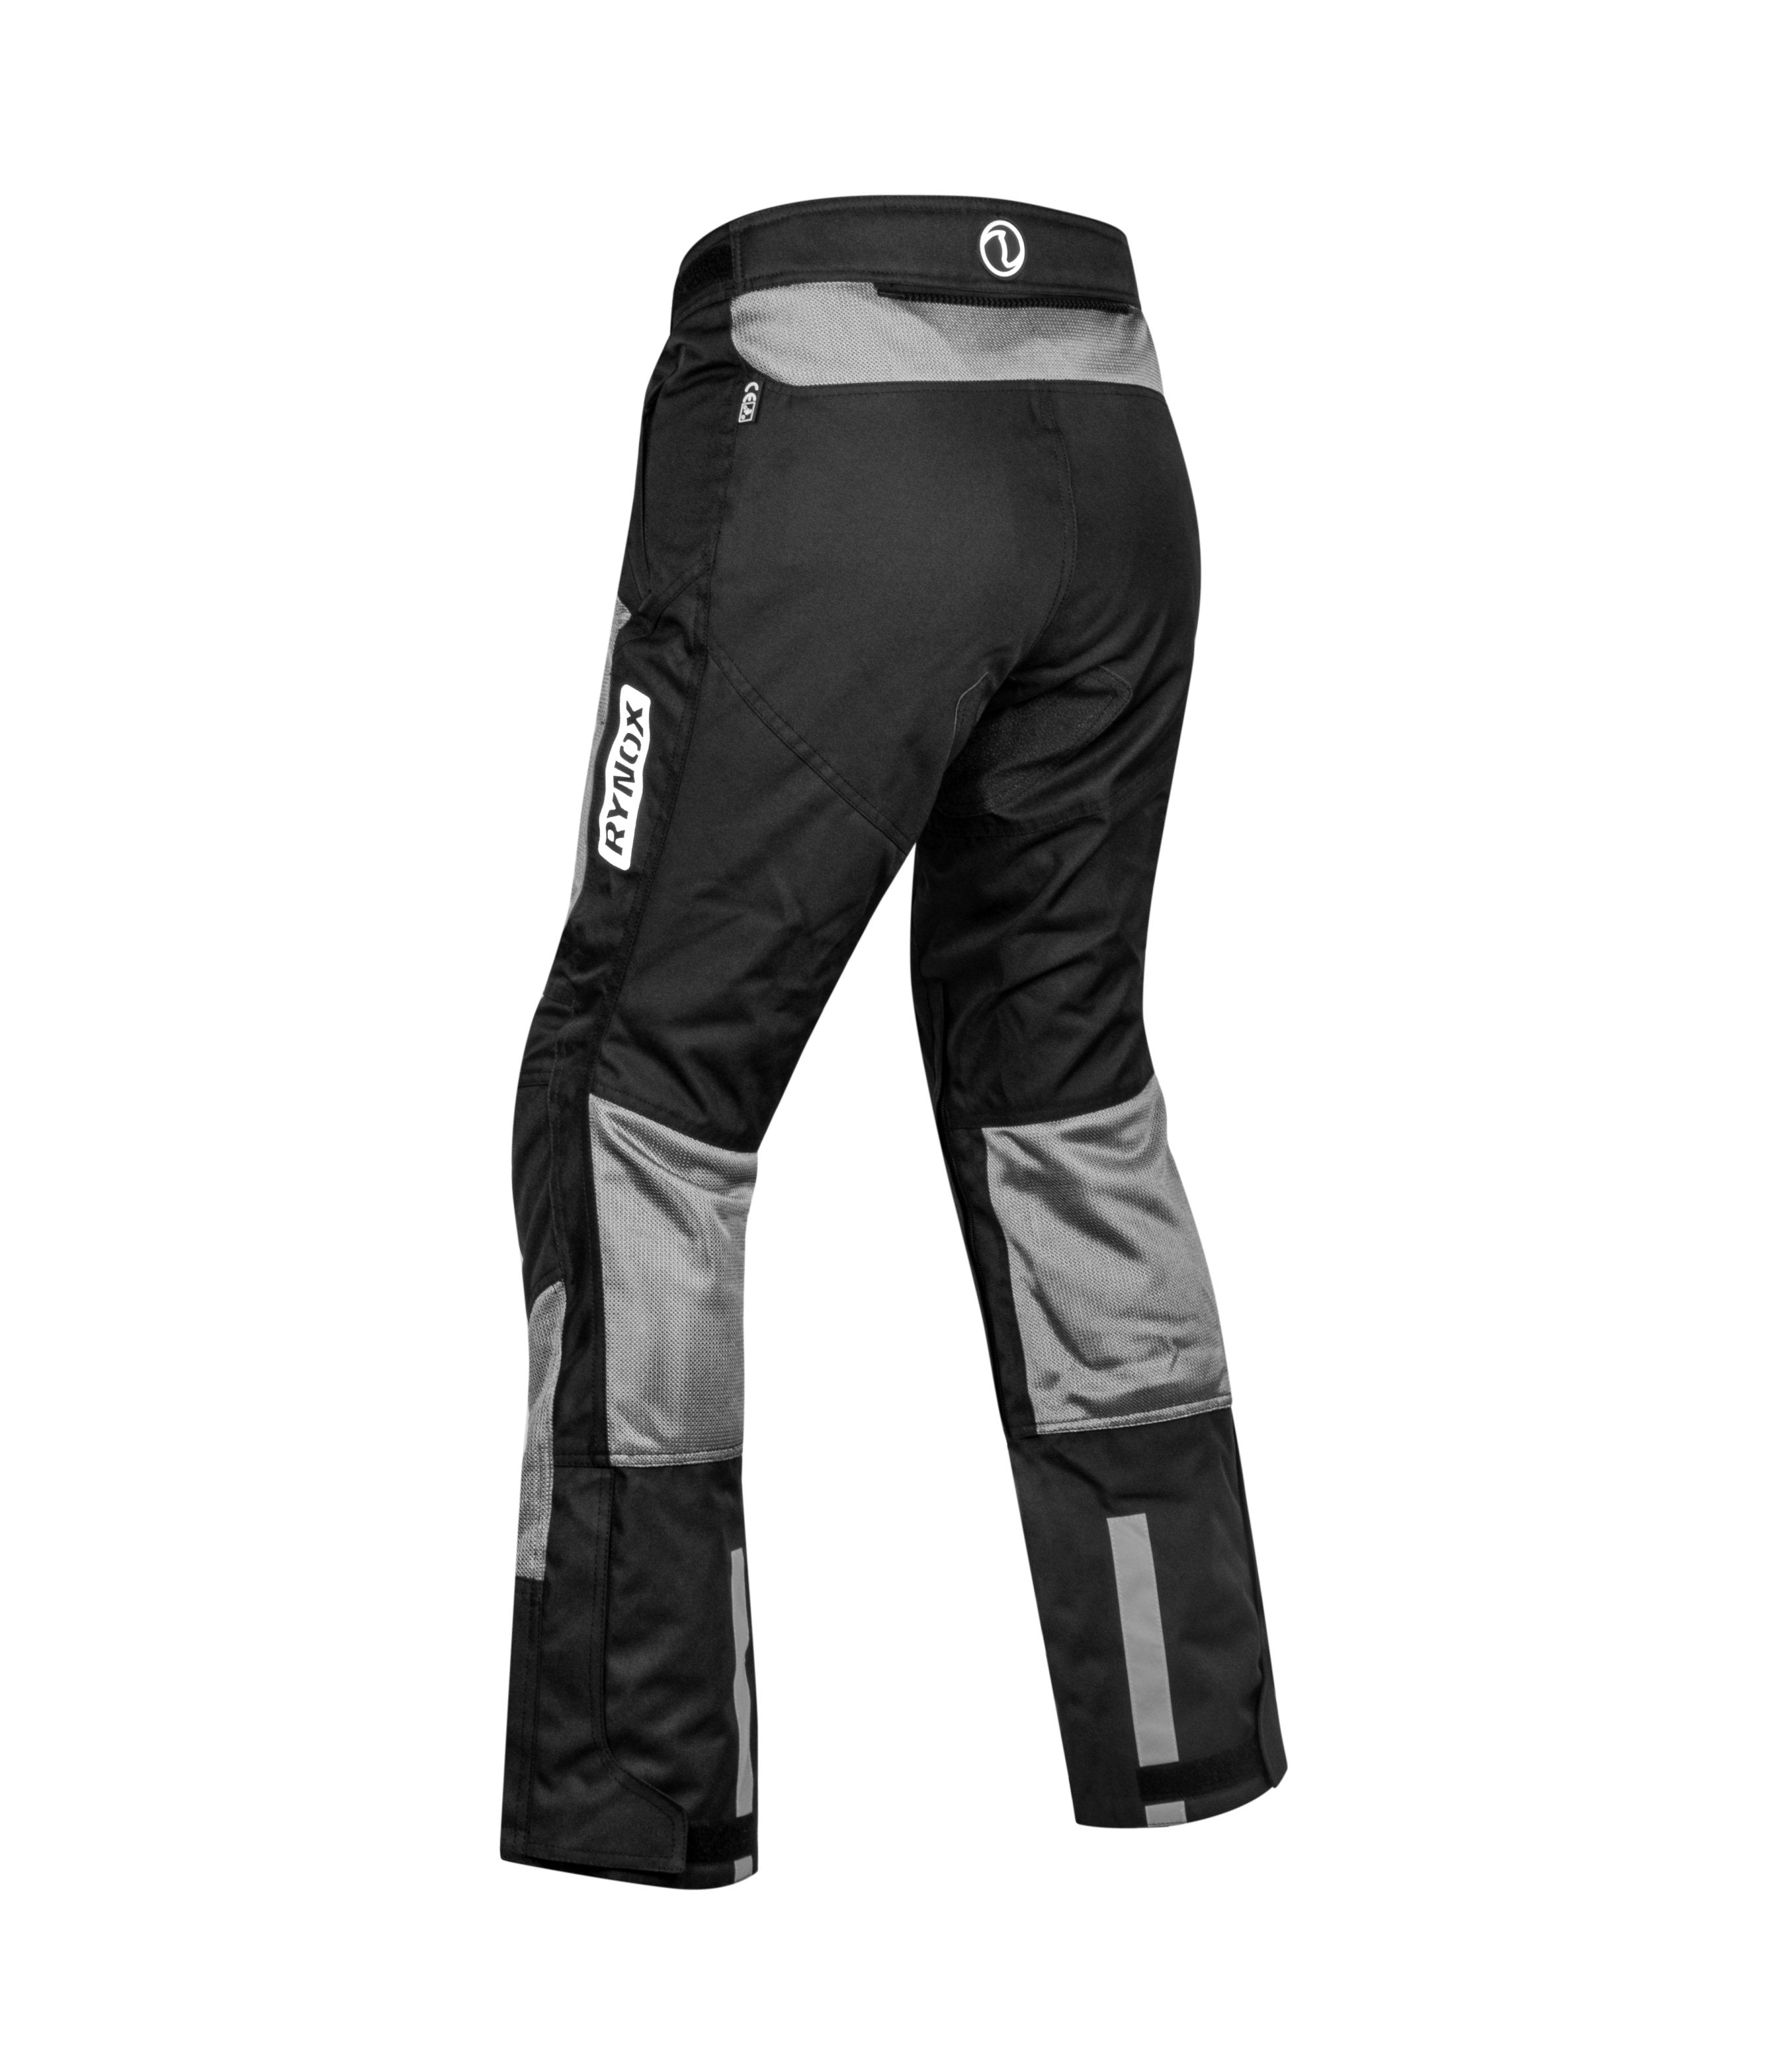 Discover 80 royal racing trousers super hot  incdgdbentre